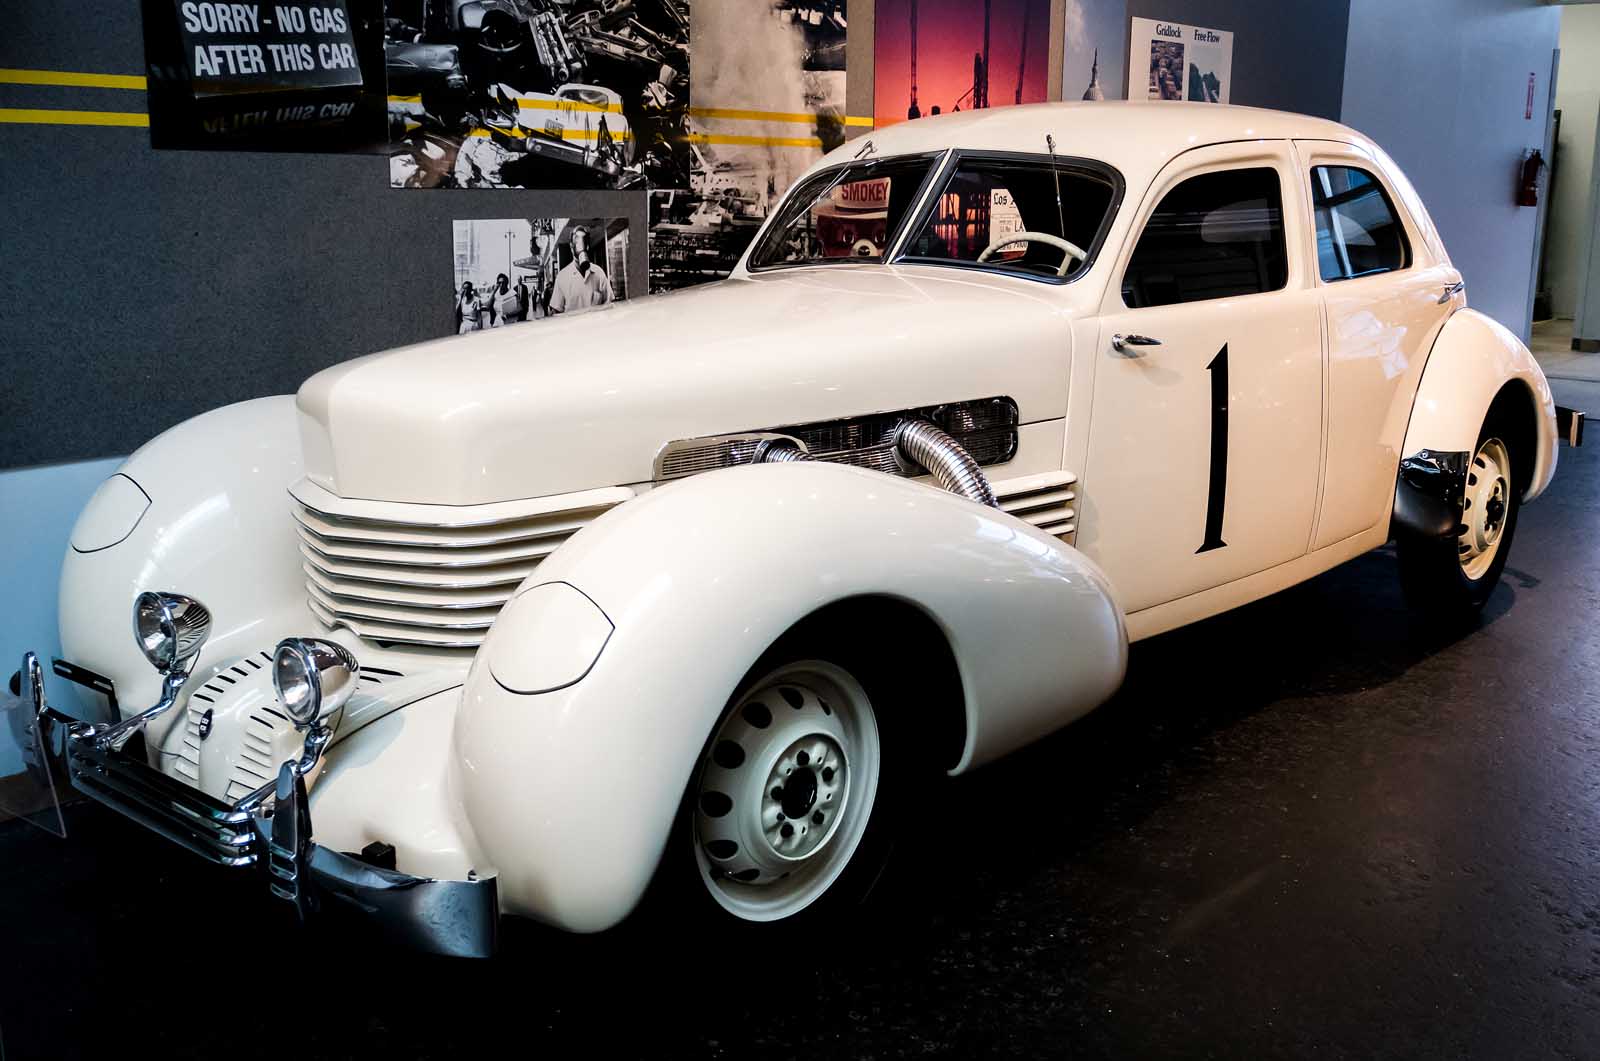 Best Things to do in Reno Nevada National Automobile Museum